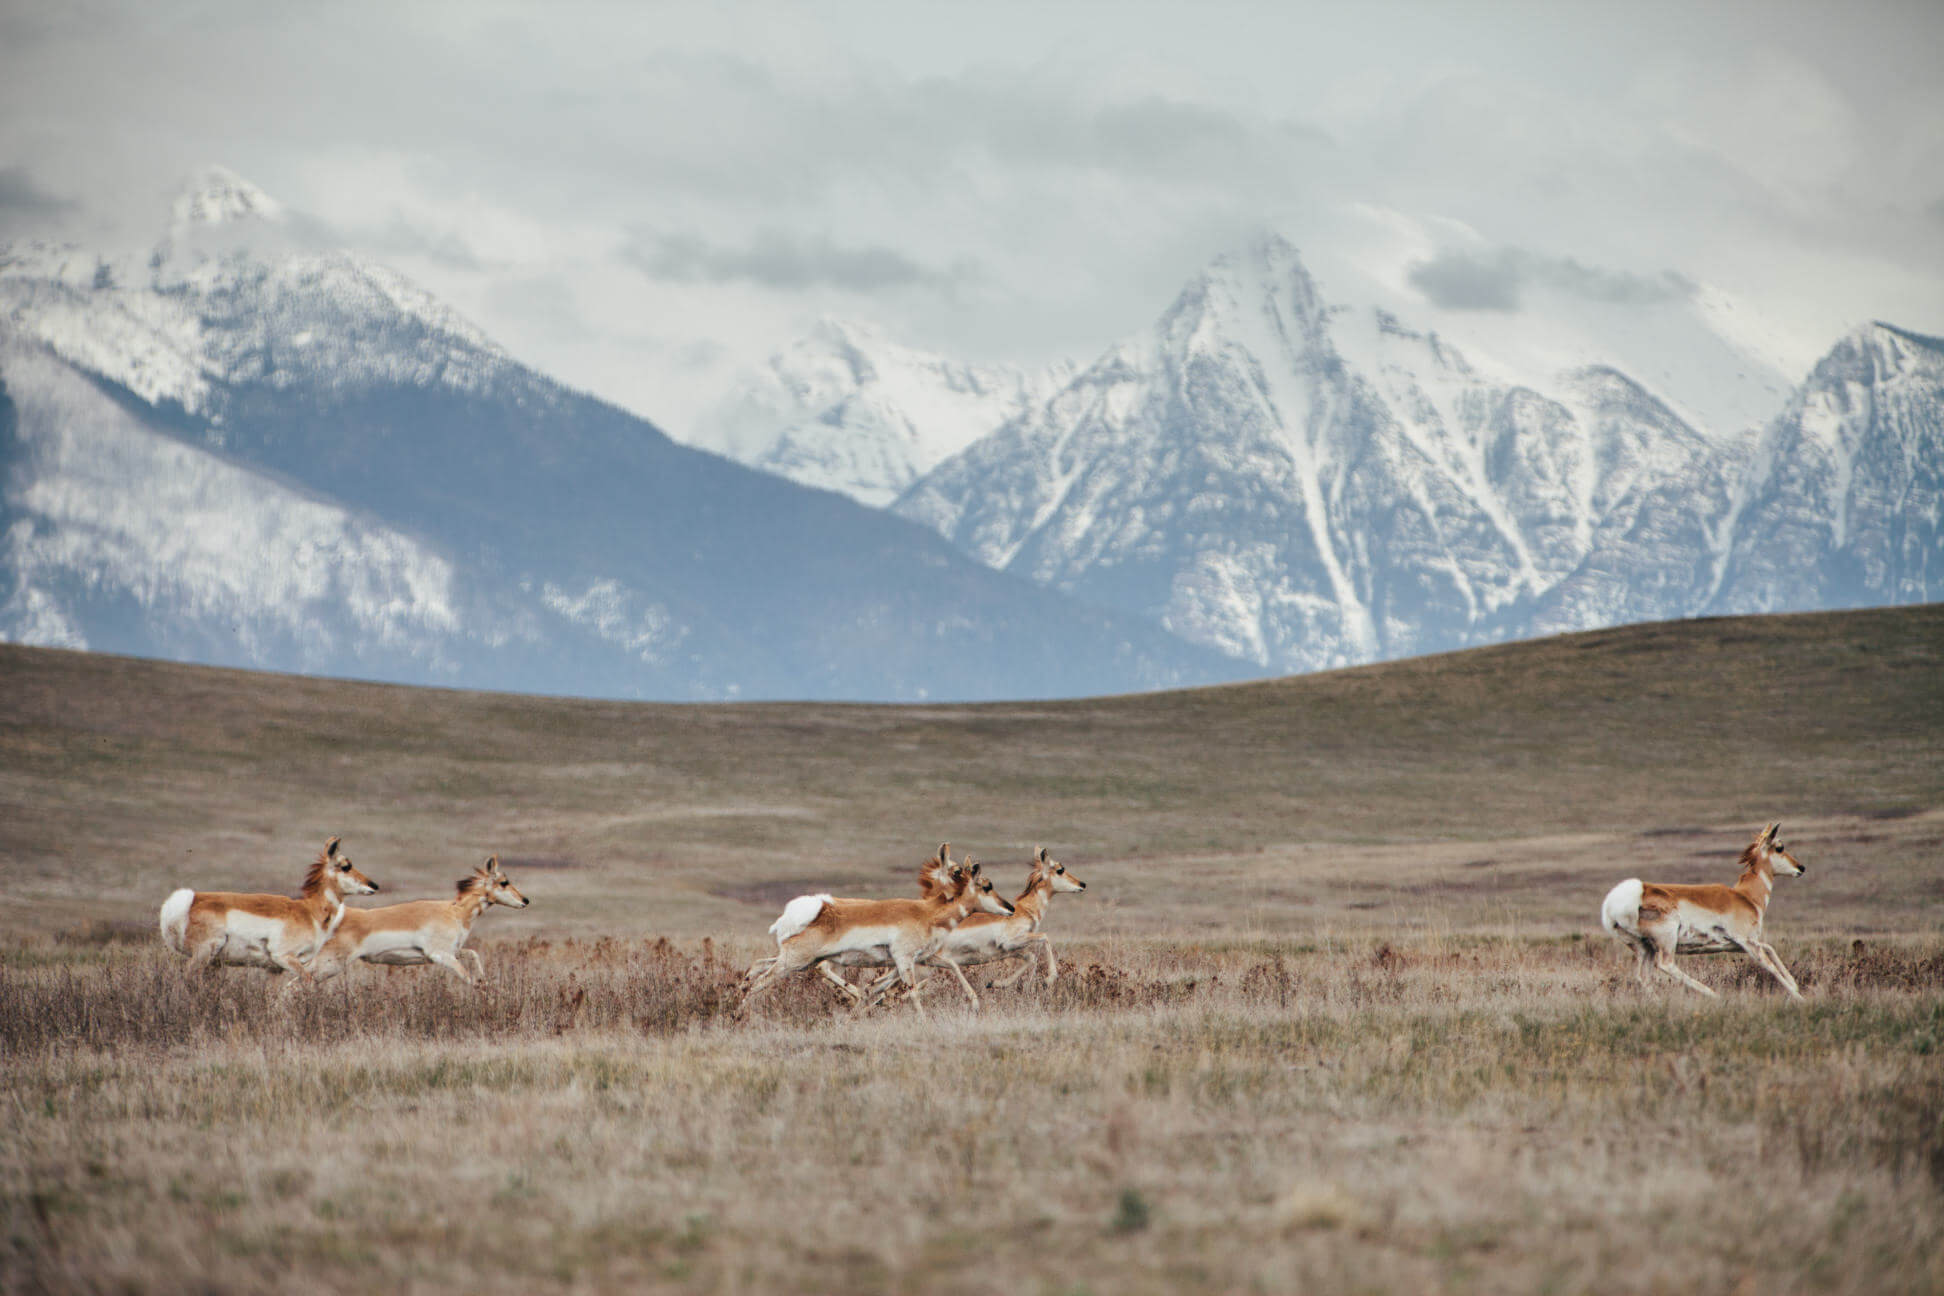 A small herd of antelope run across a field at the National Bison Range in Montana